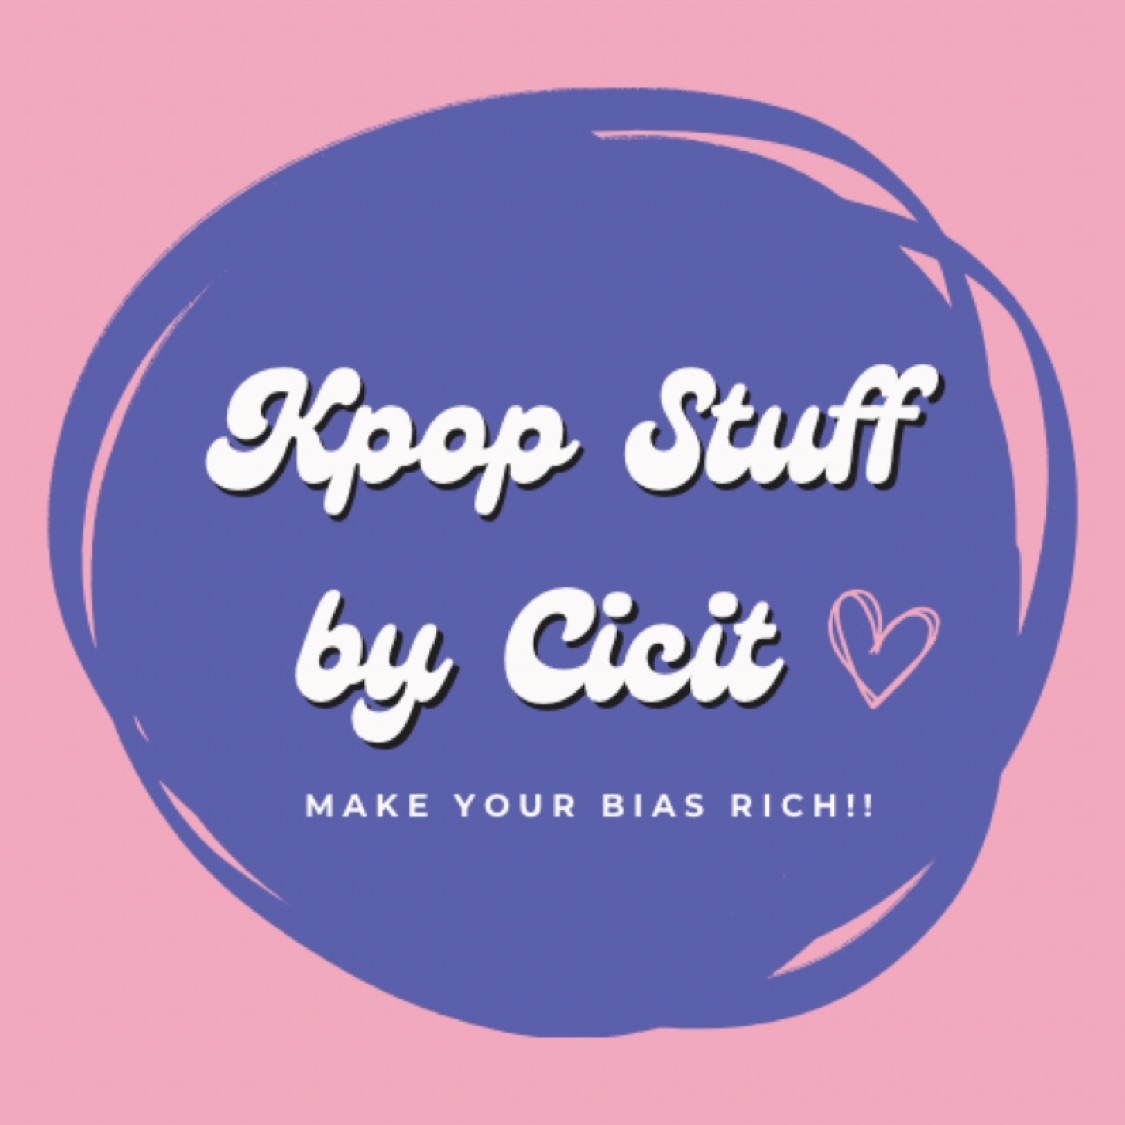 Produk Kpop Stuff by Cicit💘 | Shopee Indonesia